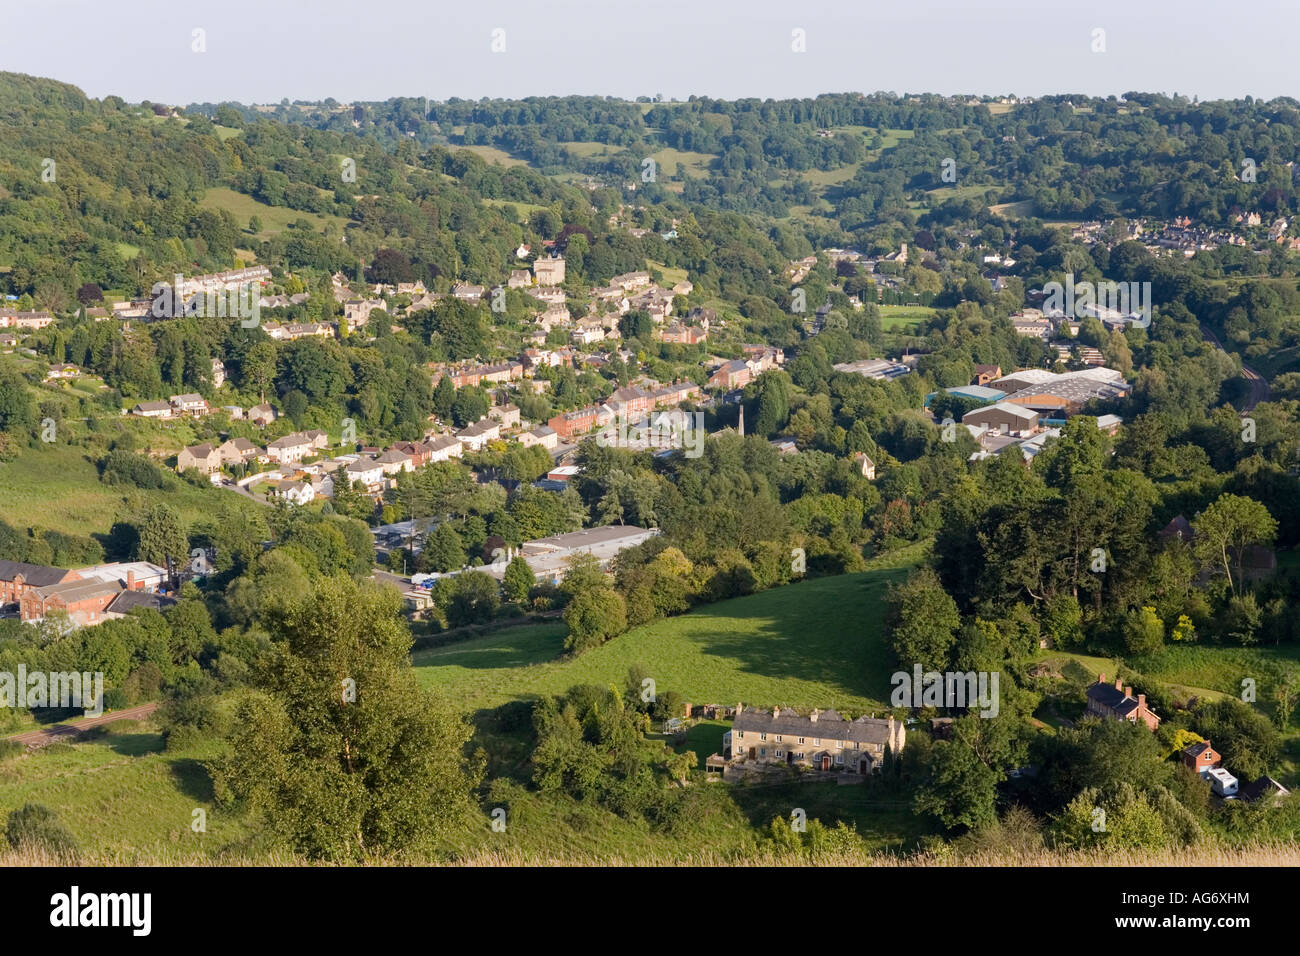 Brimscombe in the Stroud Valleys, Gloucestershire viewed from Rodborough Common Stock Photo